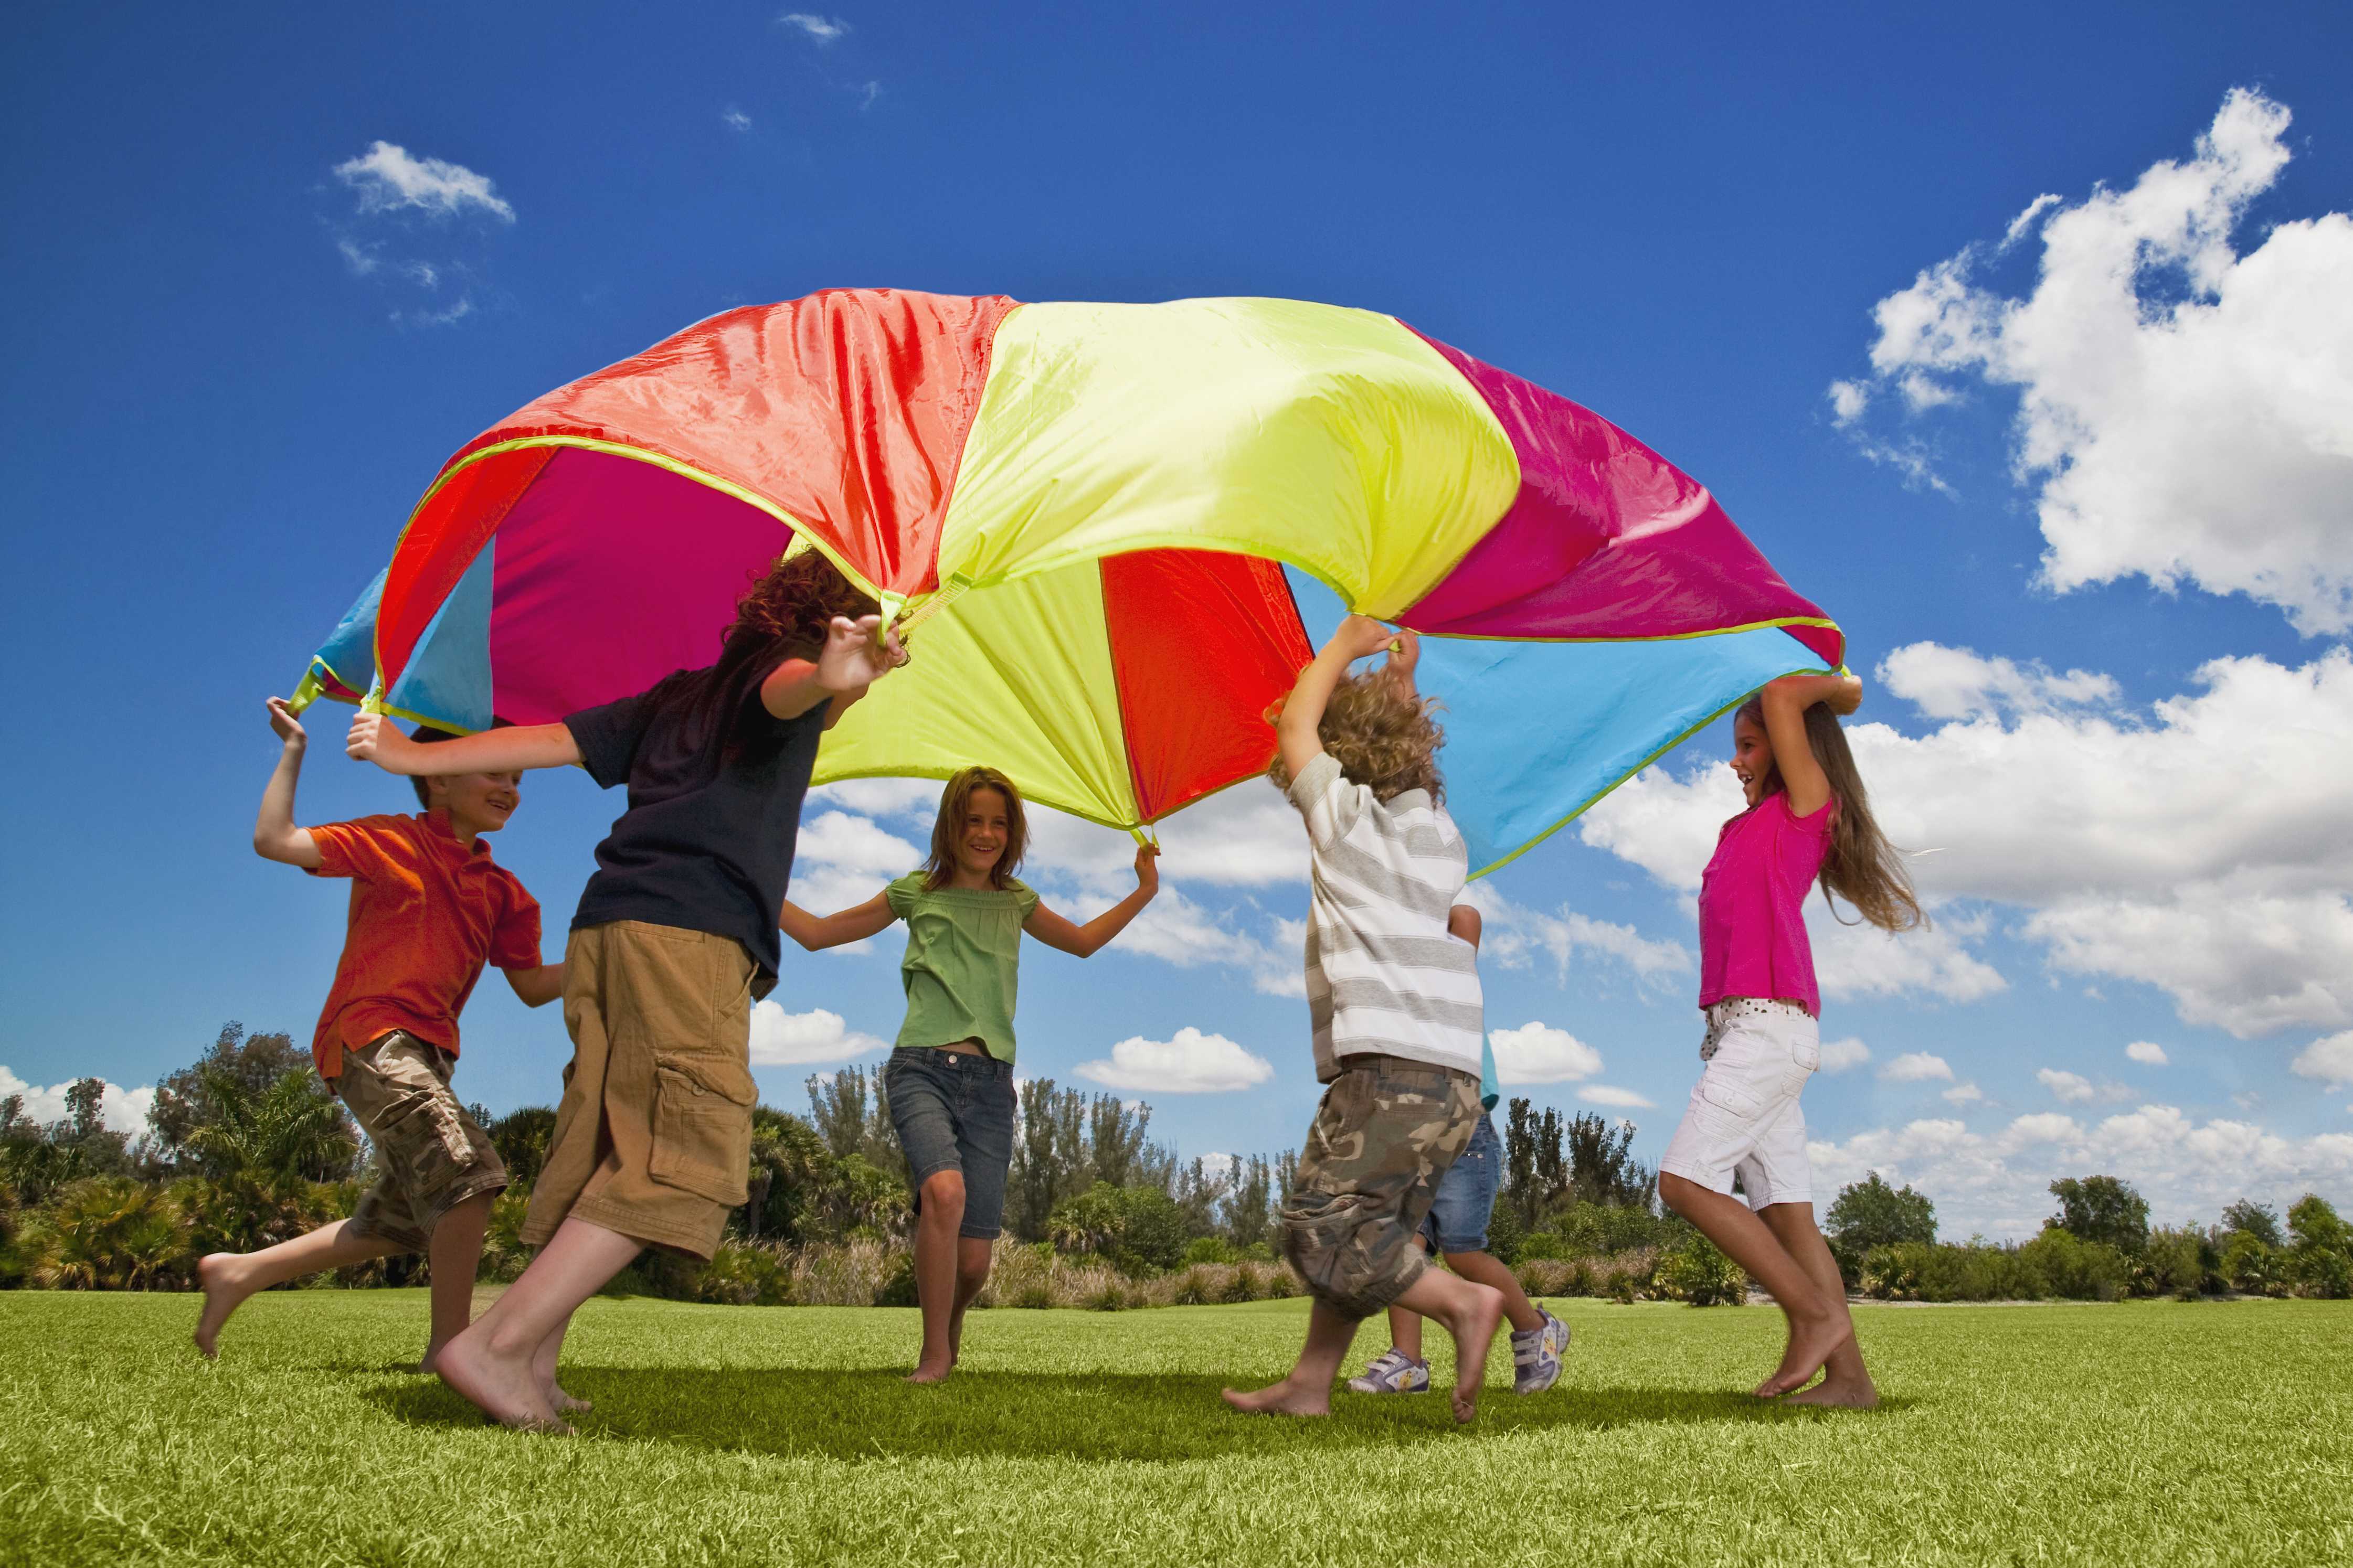 Group of kids playing with a parachute in the park (Mark Mann—Getty Images)